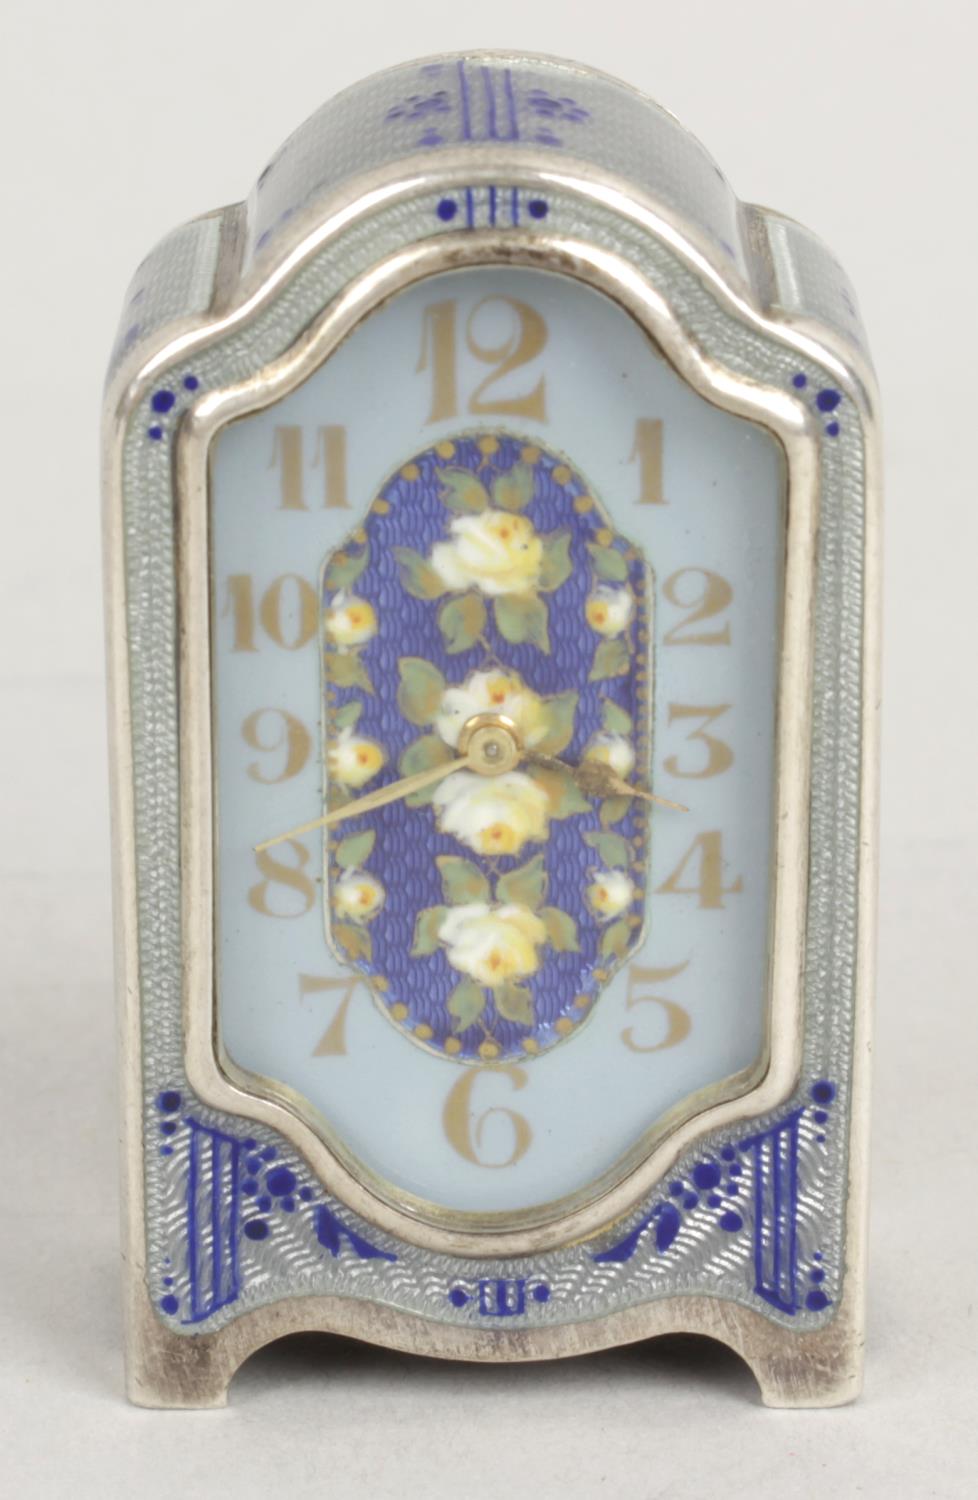 An early 20th century 925 sterling silver and enamelled miniature clock,